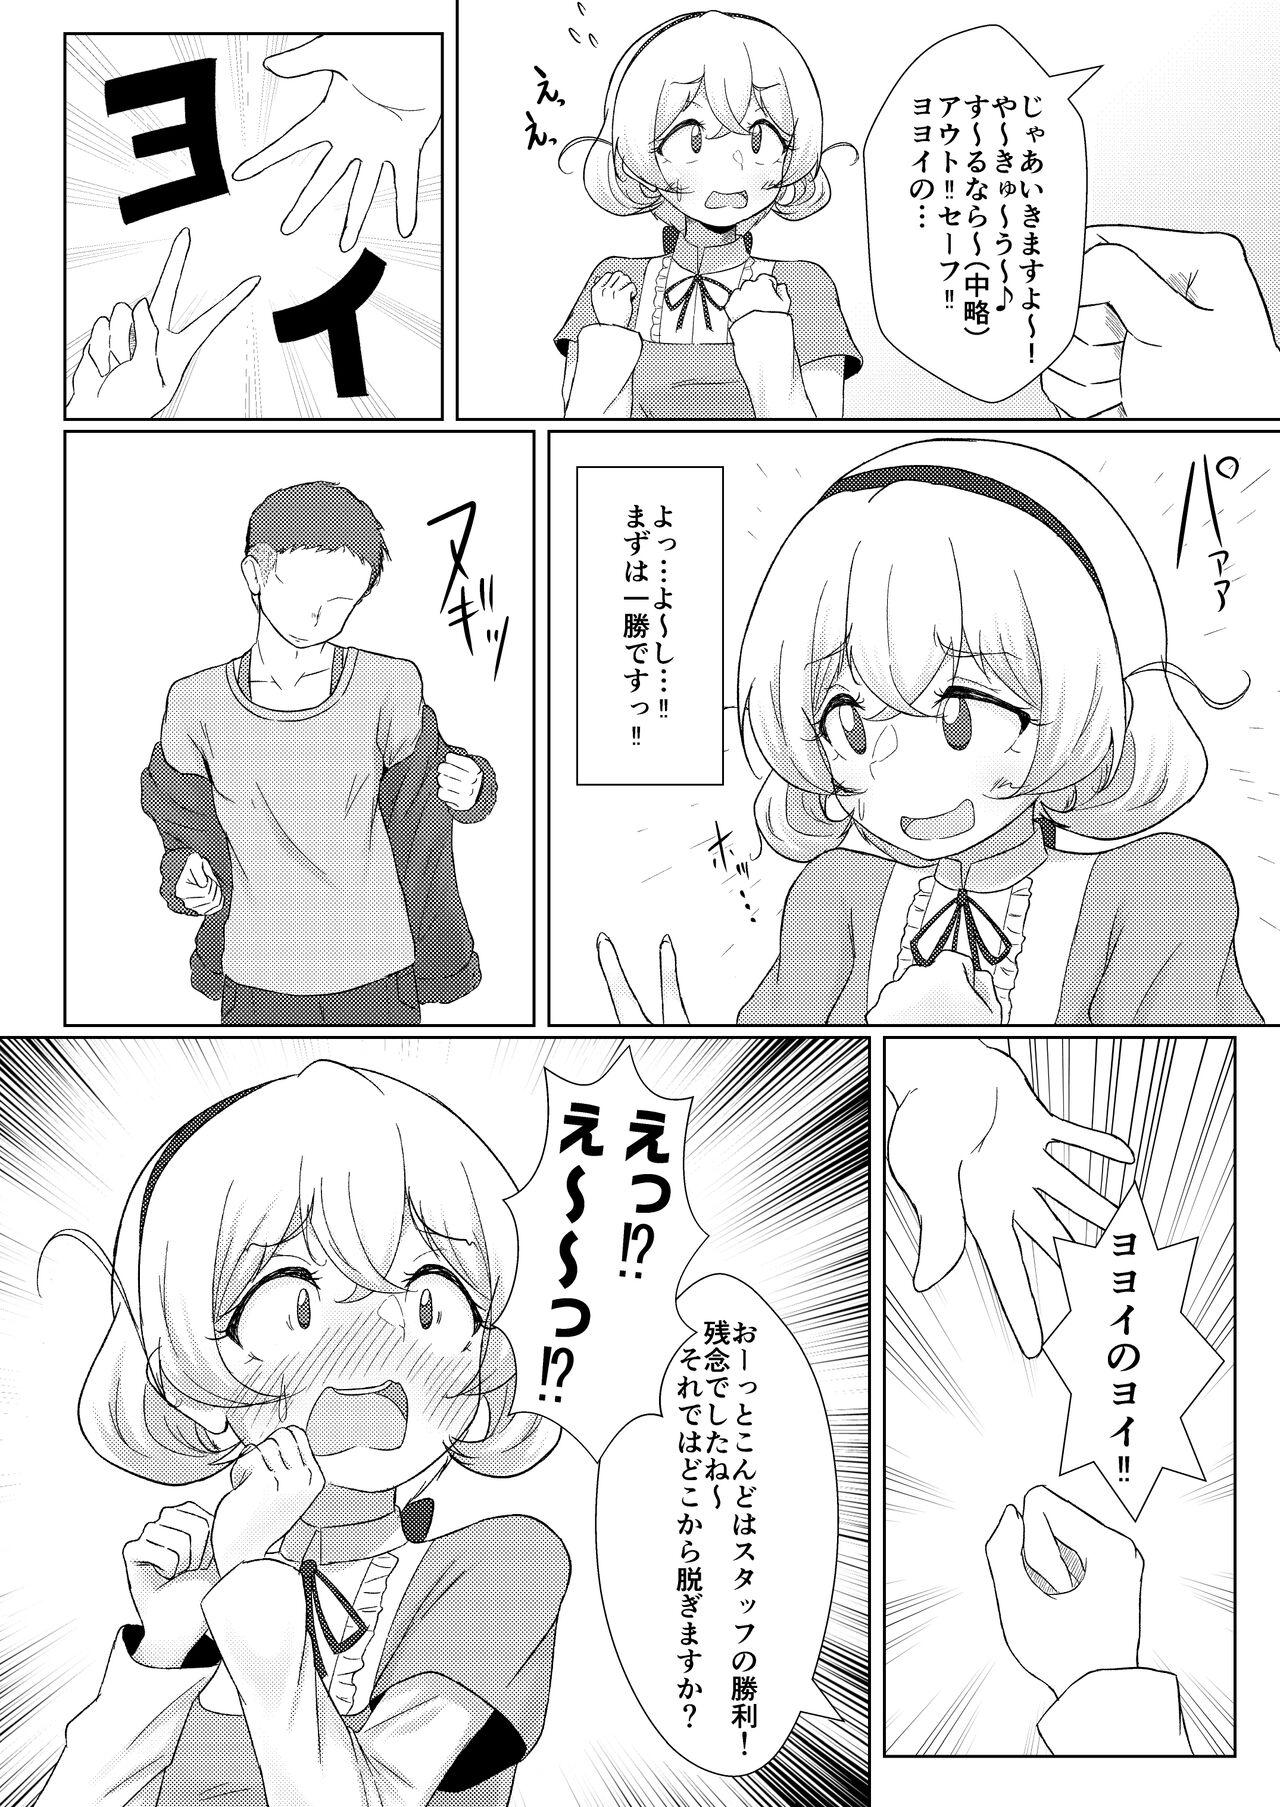 Amature Sex 素人ナンパ!!水名女○園生とガチンコ野球拳 - Puella magi madoka magica side story magia record Shoplifter - Page 5